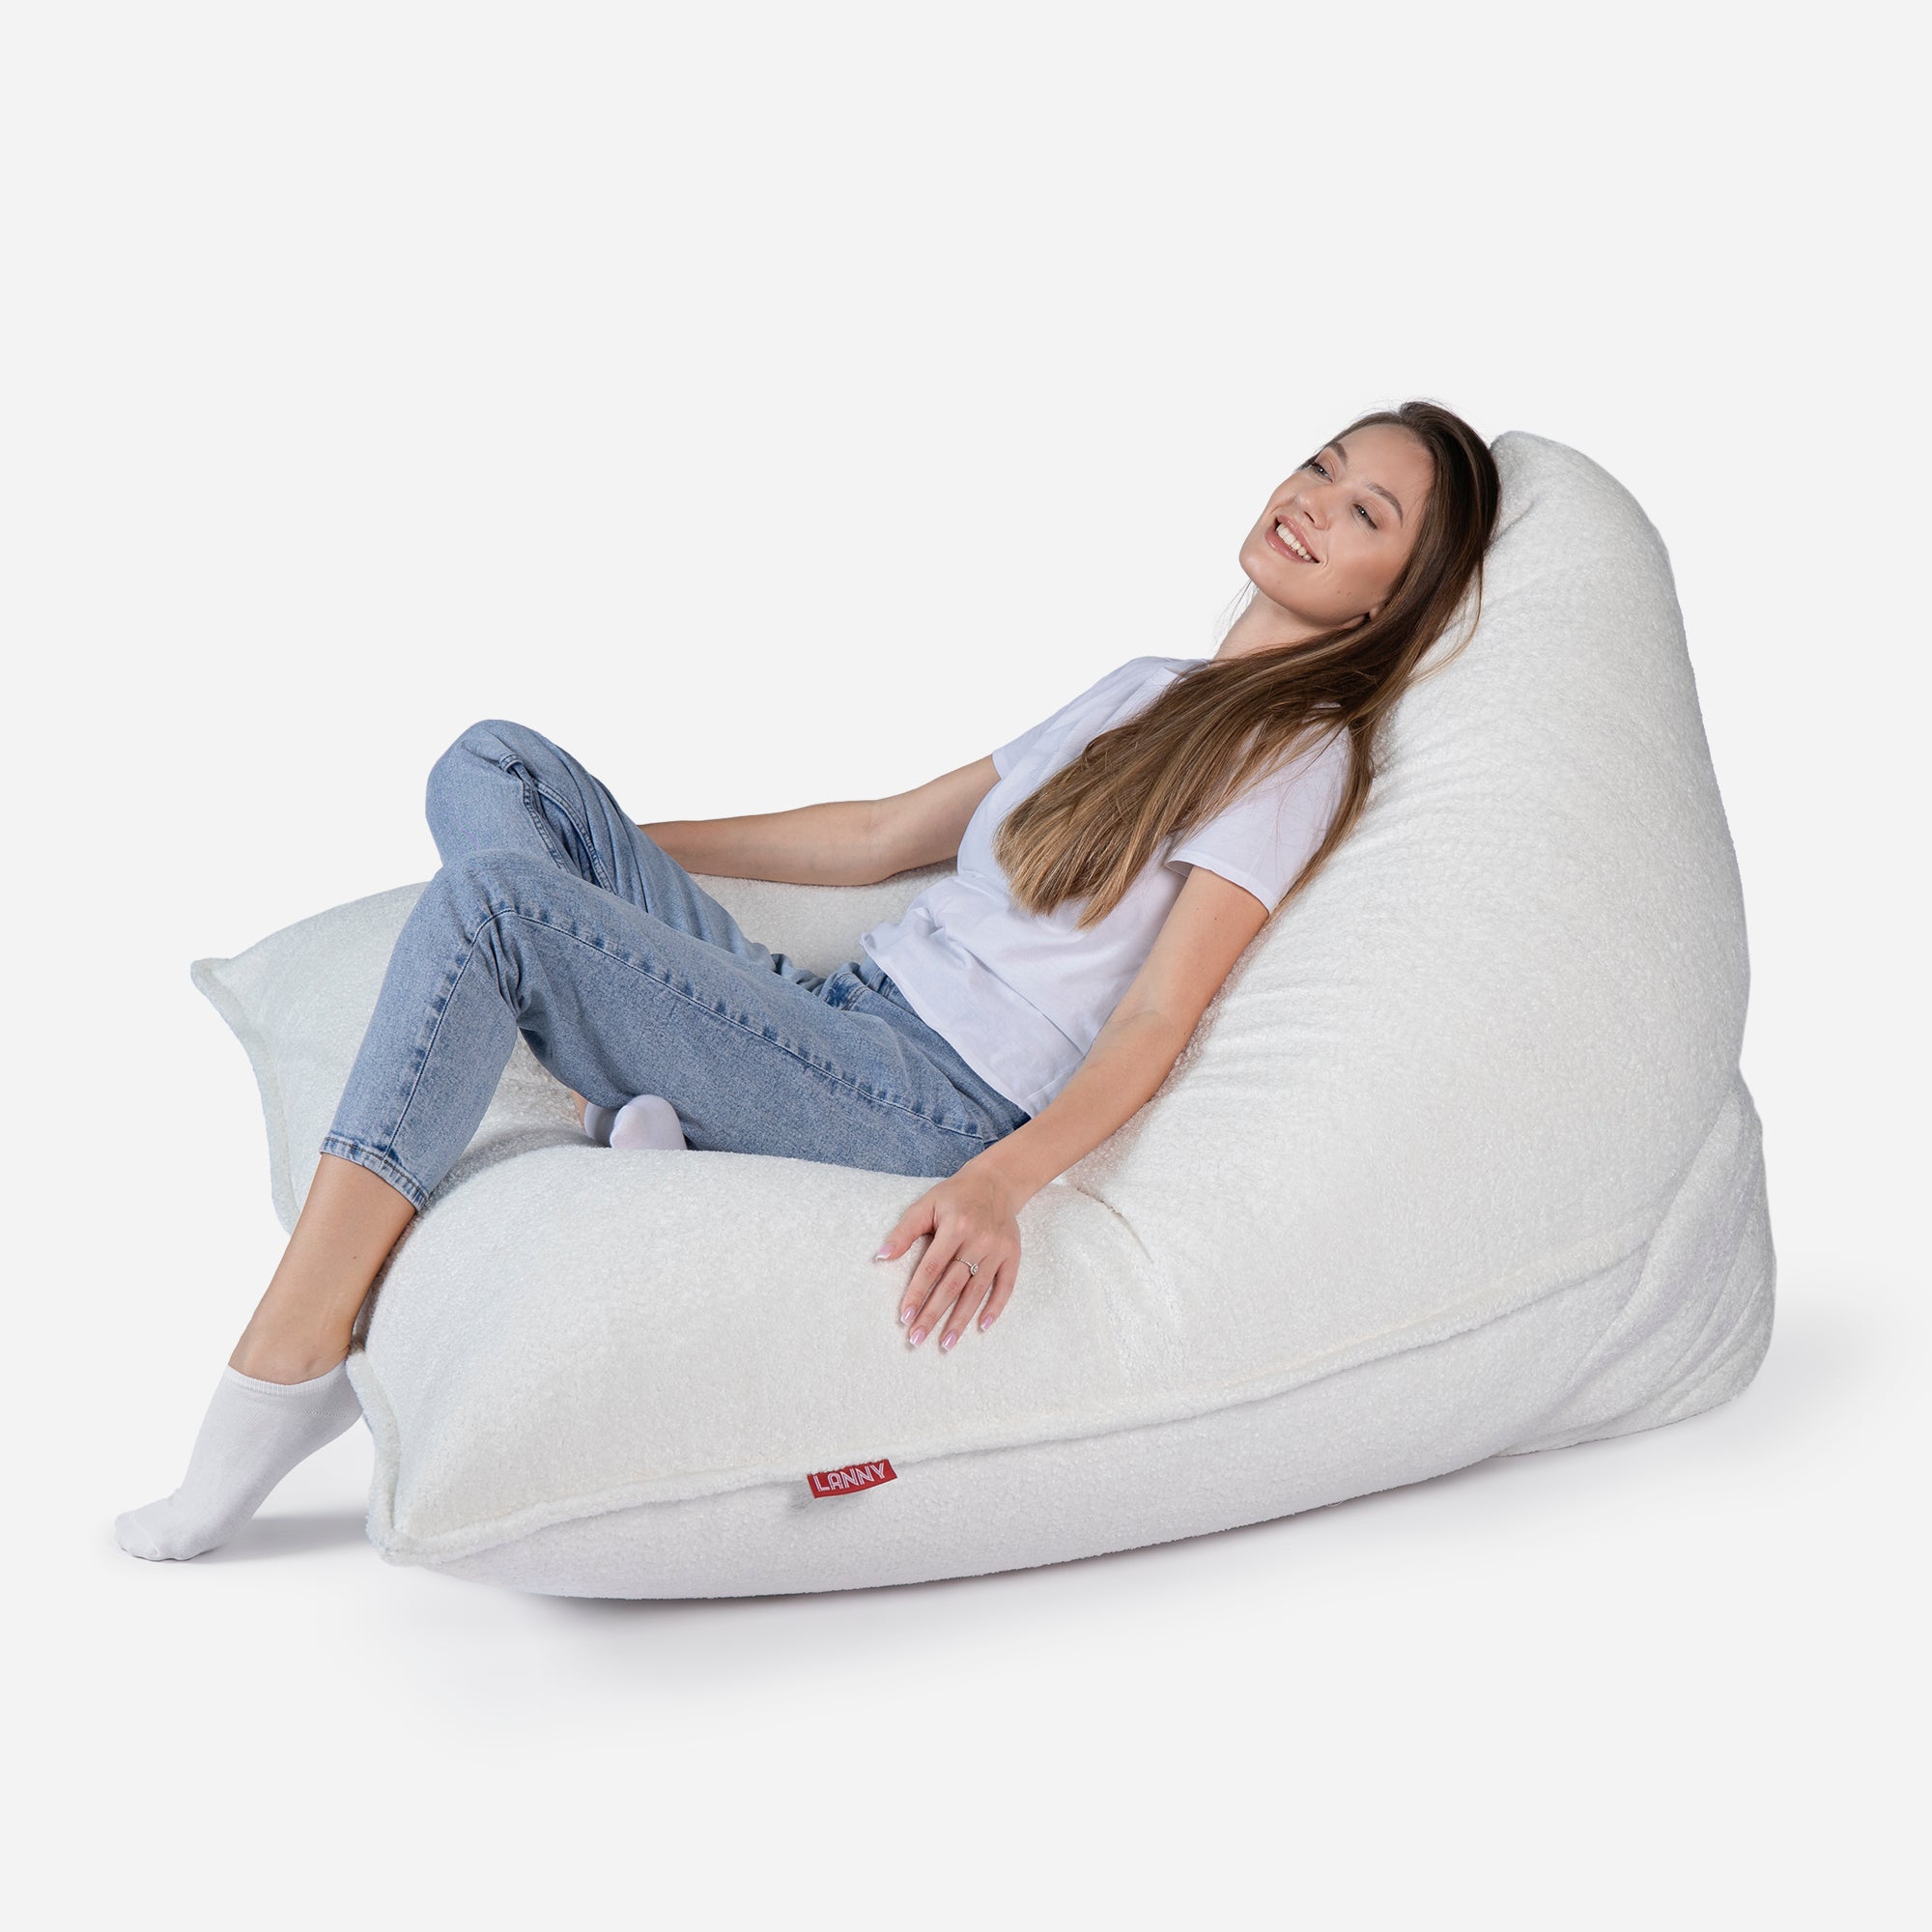 Beanbag Sloppy design fluffy fabric White color  with girl seating on it 